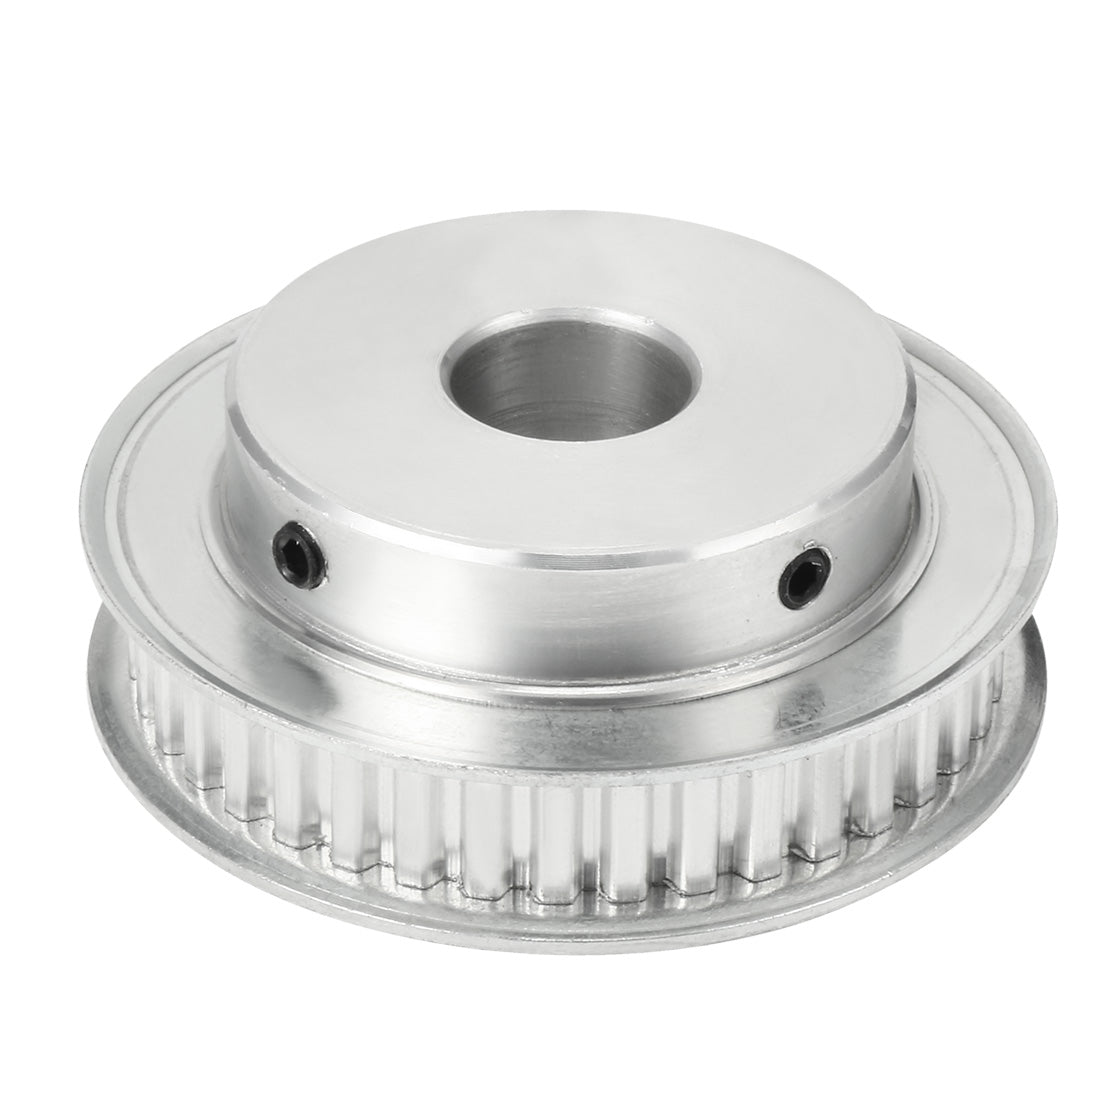 uxcell Uxcell Aluminum XL 40 Teeth 15mm Bore Timing Belt Idler Pulley Flange Synchronous Wheel for 10mm Belt CNC